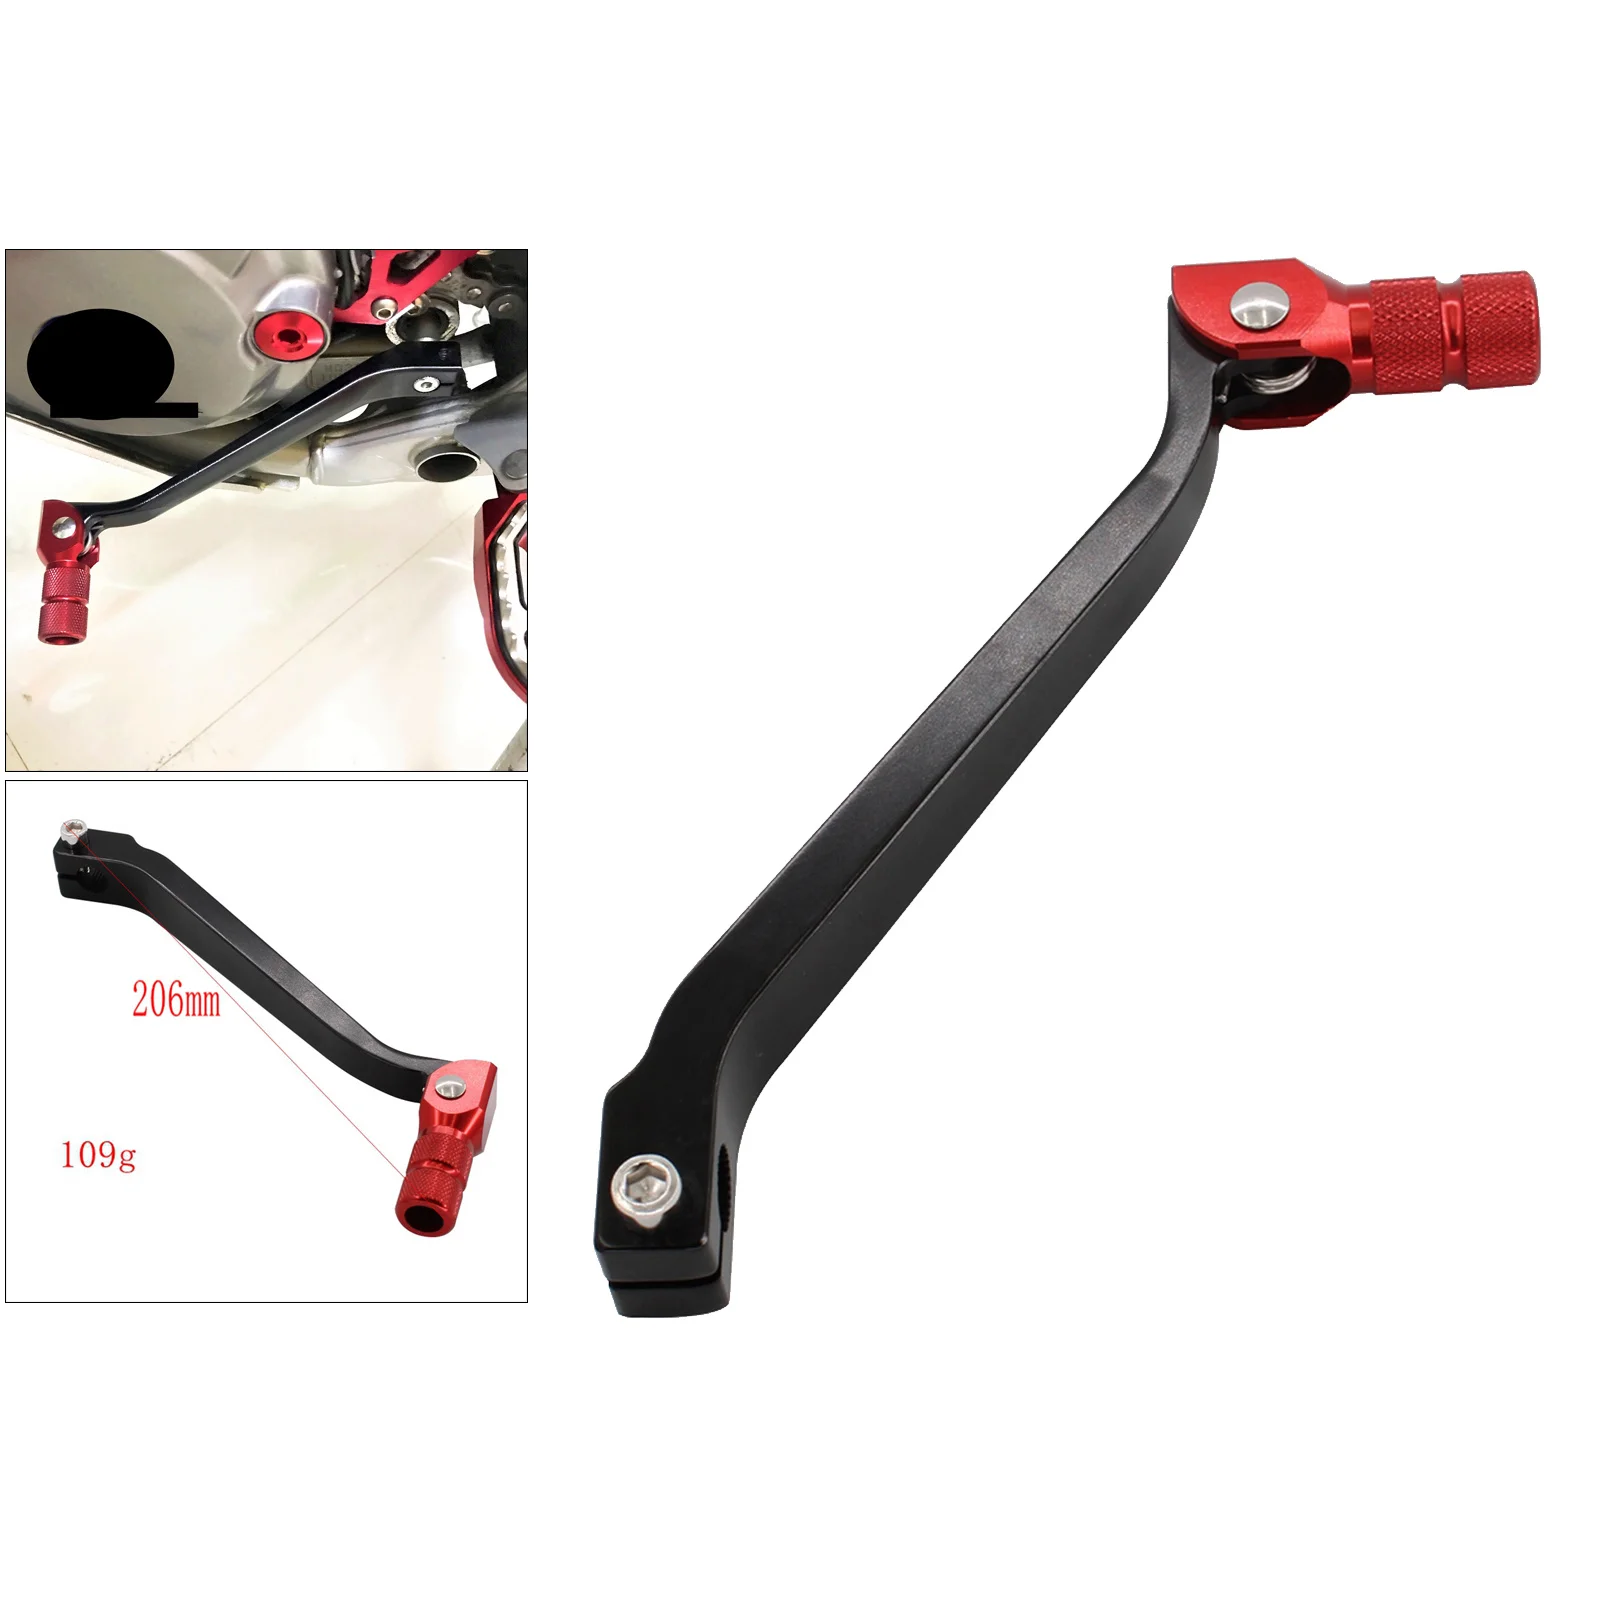 Tusk Reliable Folding Gear Shift Lever for Honda CRF250L 250L 2014 2015-2019 2012-2020 Accessories